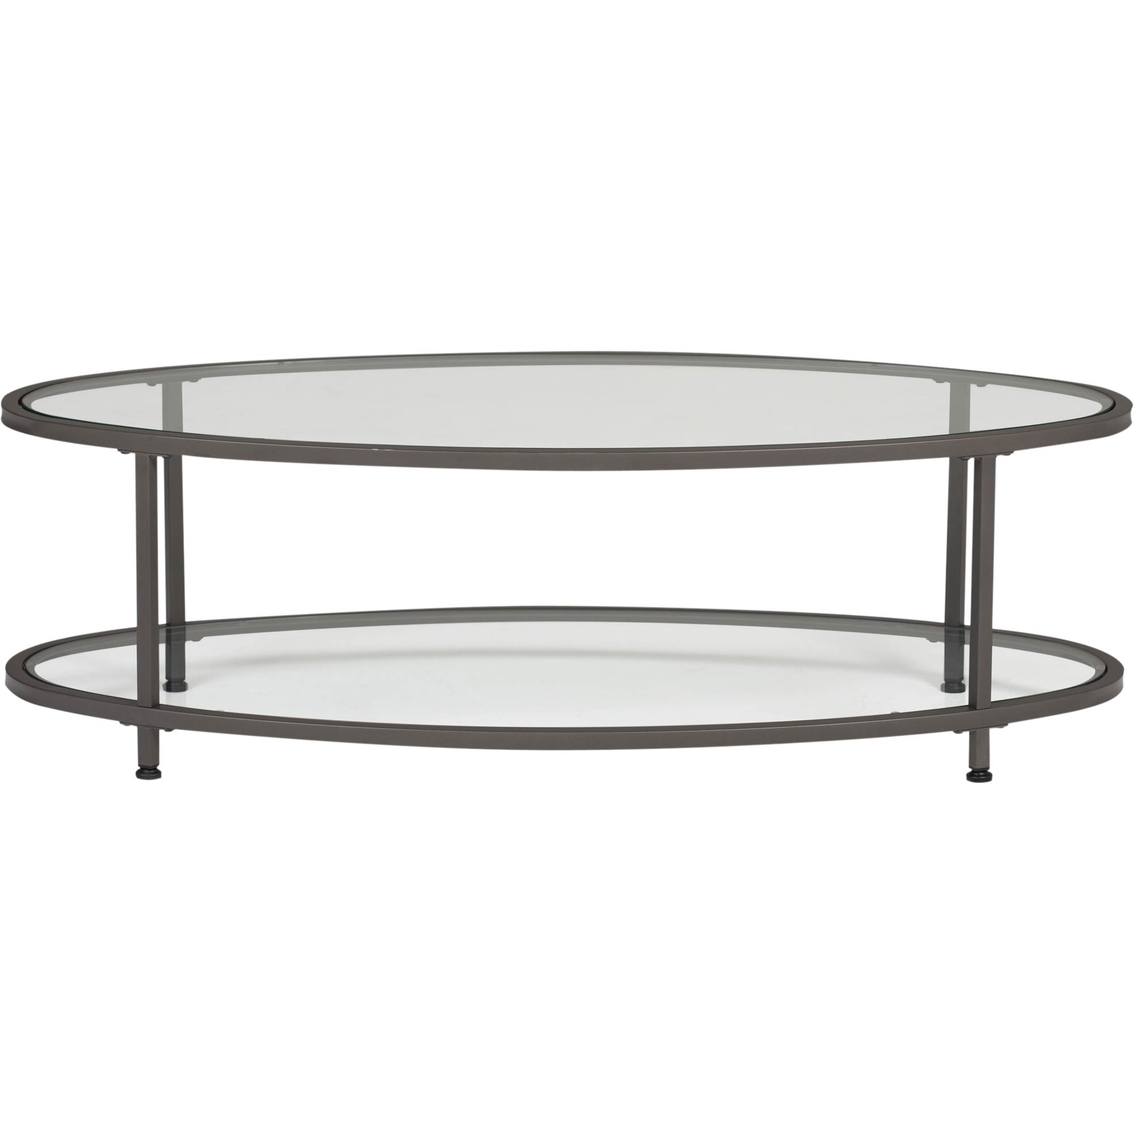 Studio Designs Home Camber 48 In. Oval Coffee Table in Pewter and Clear Glass - Image 2 of 4